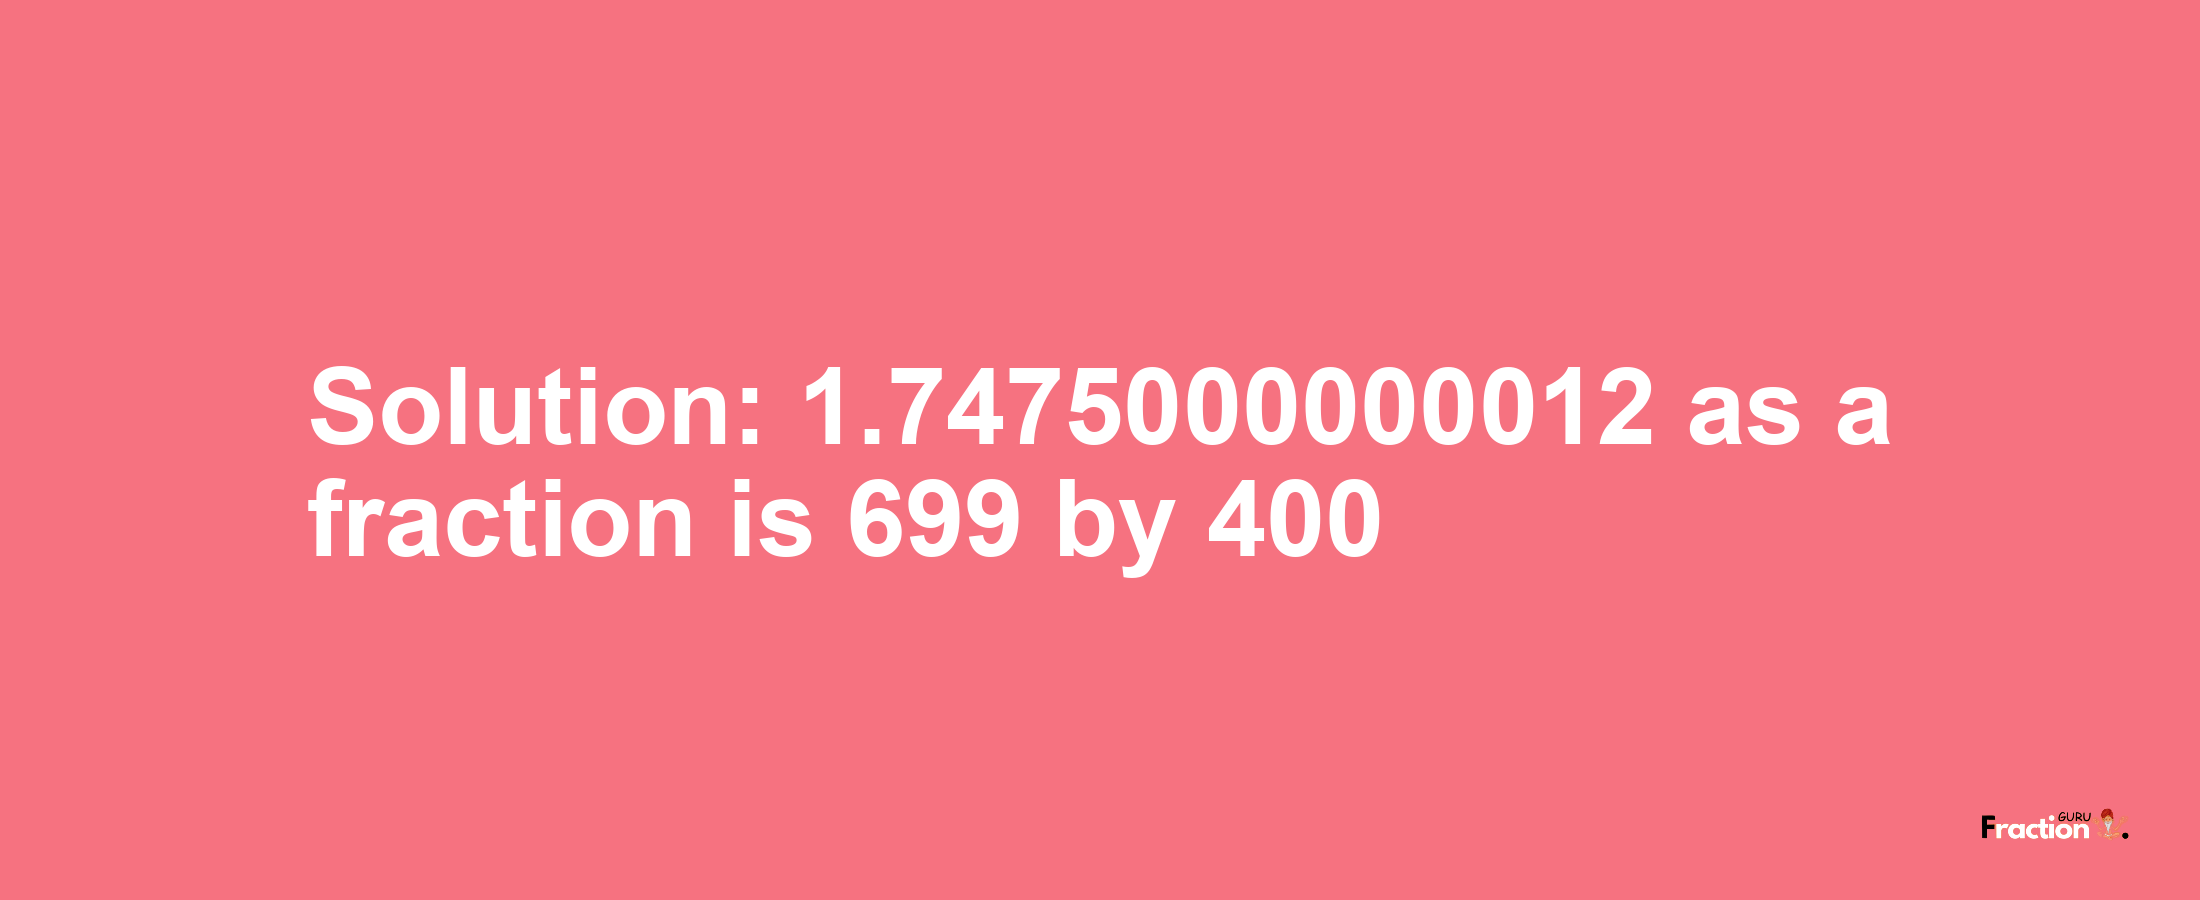 Solution:1.7475000000012 as a fraction is 699/400